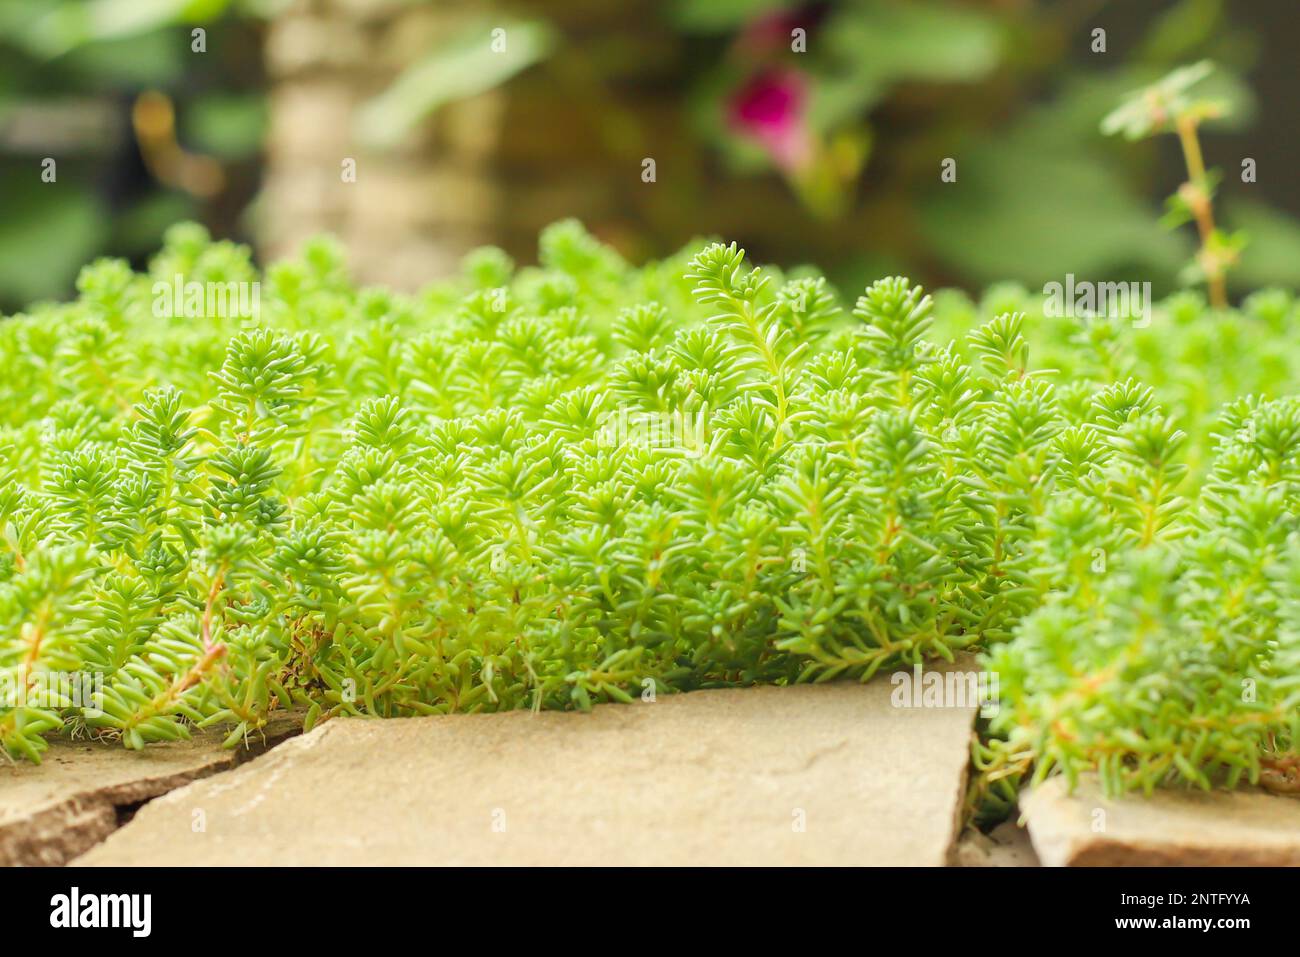 Stonecrop sedum plants and stone. small green succulent plants a lot. Front view, selective focus Stock Photo